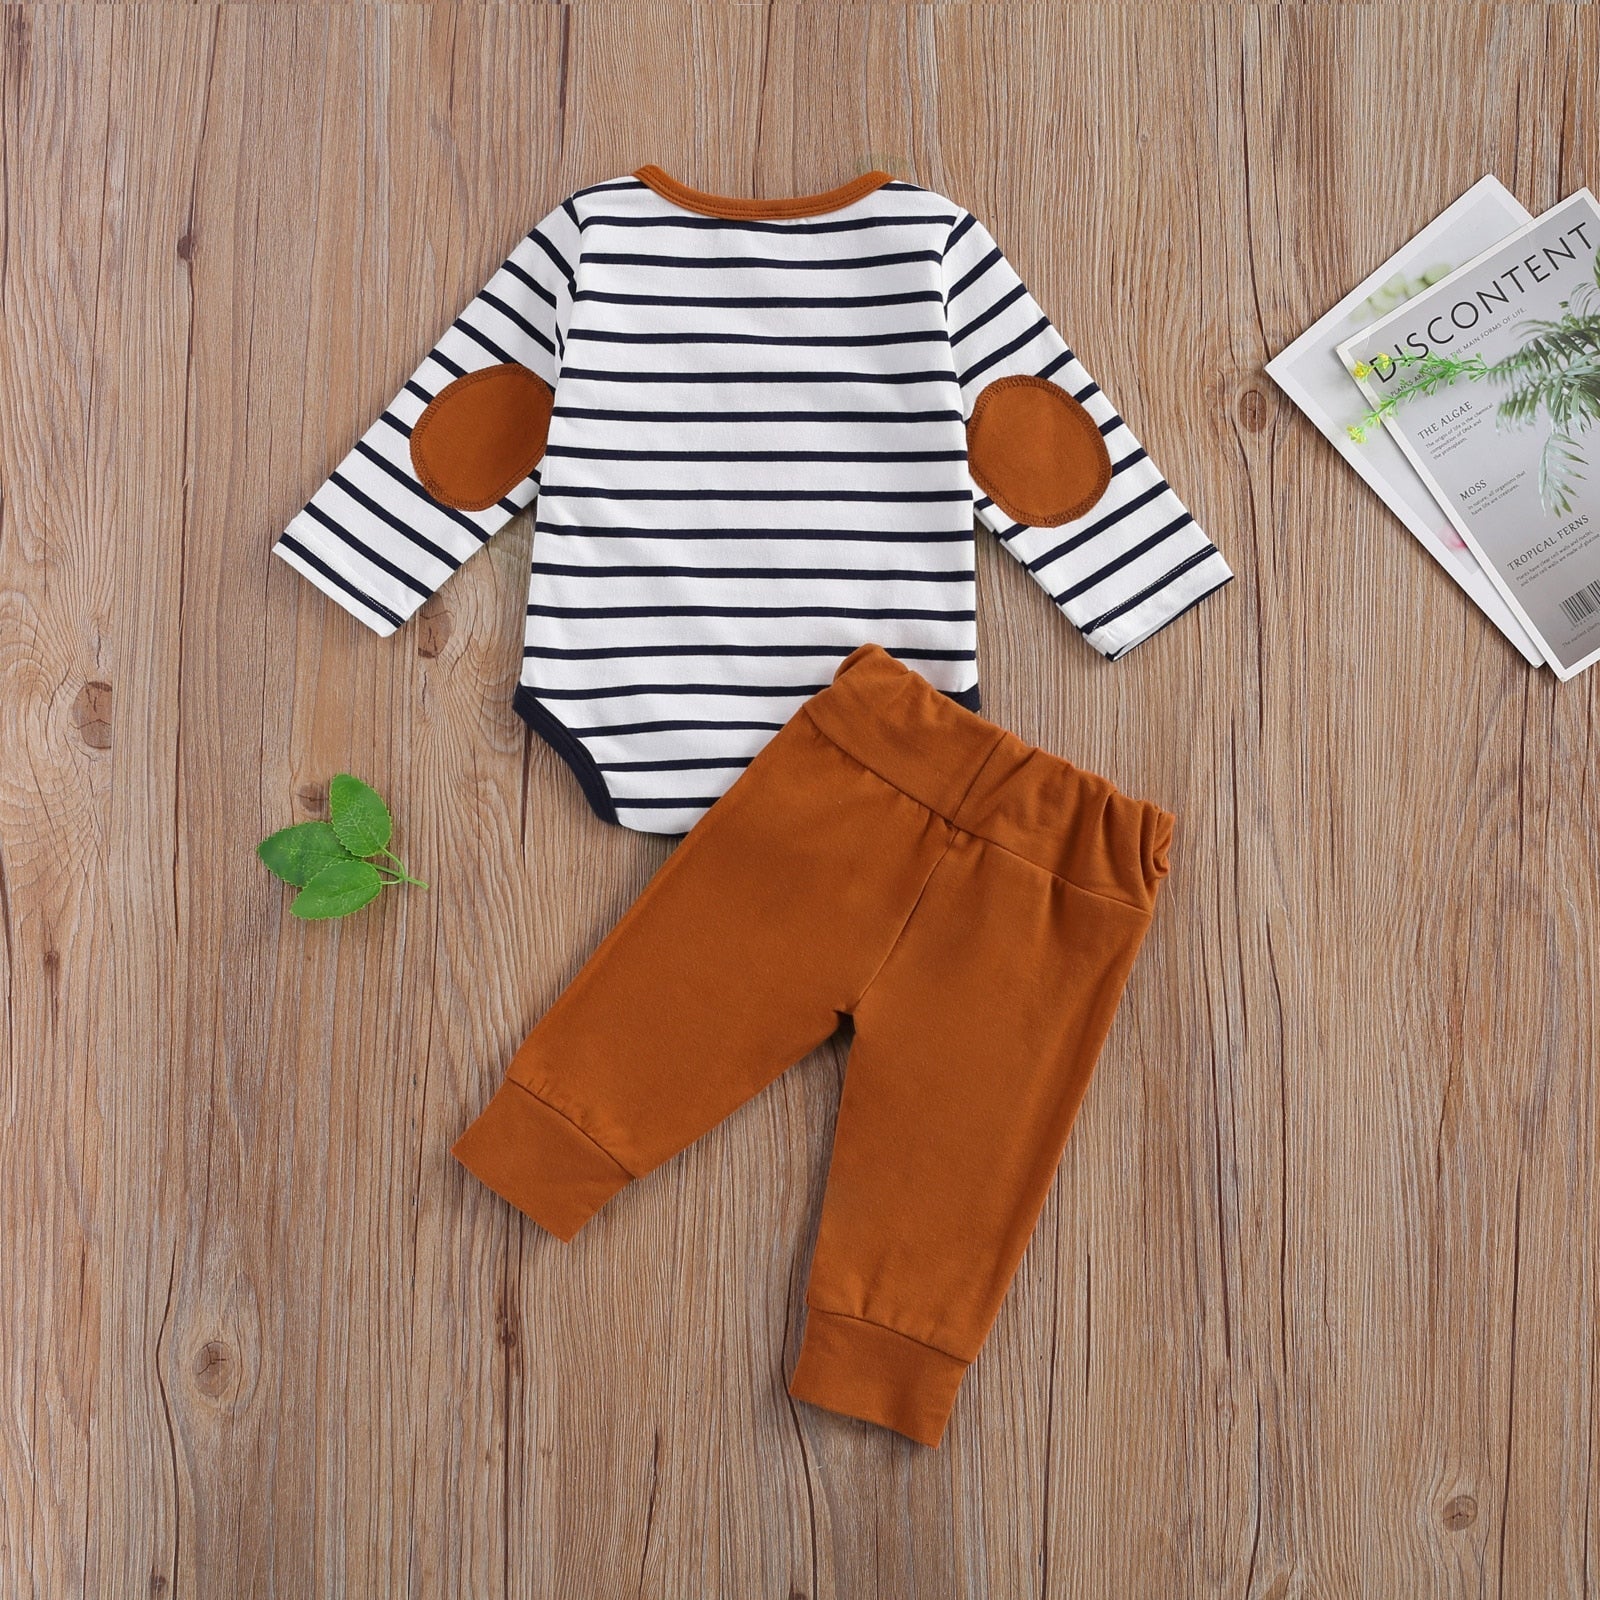 LIORAITIIN - 2 Pcs Baby Boy Girl Casual Suit Clothing Round Neck Long Sleeve Stripe Romper Button Decoration Loose Trousers - KME means the very best